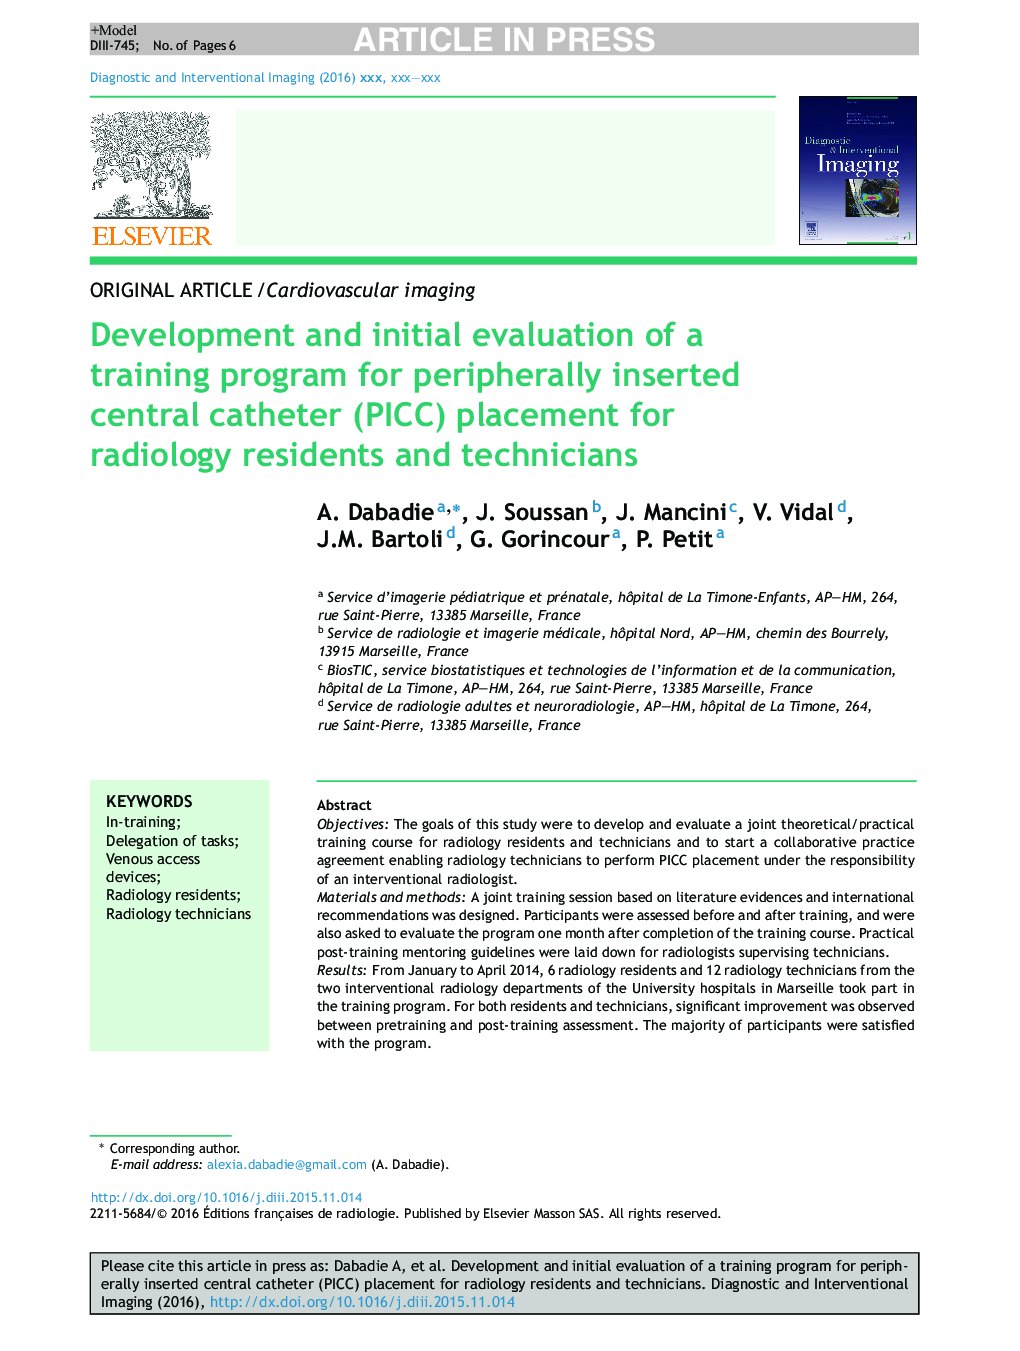 Development and initial evaluation of a training program for peripherally inserted central catheter (PICC) placement for radiology residents and technicians